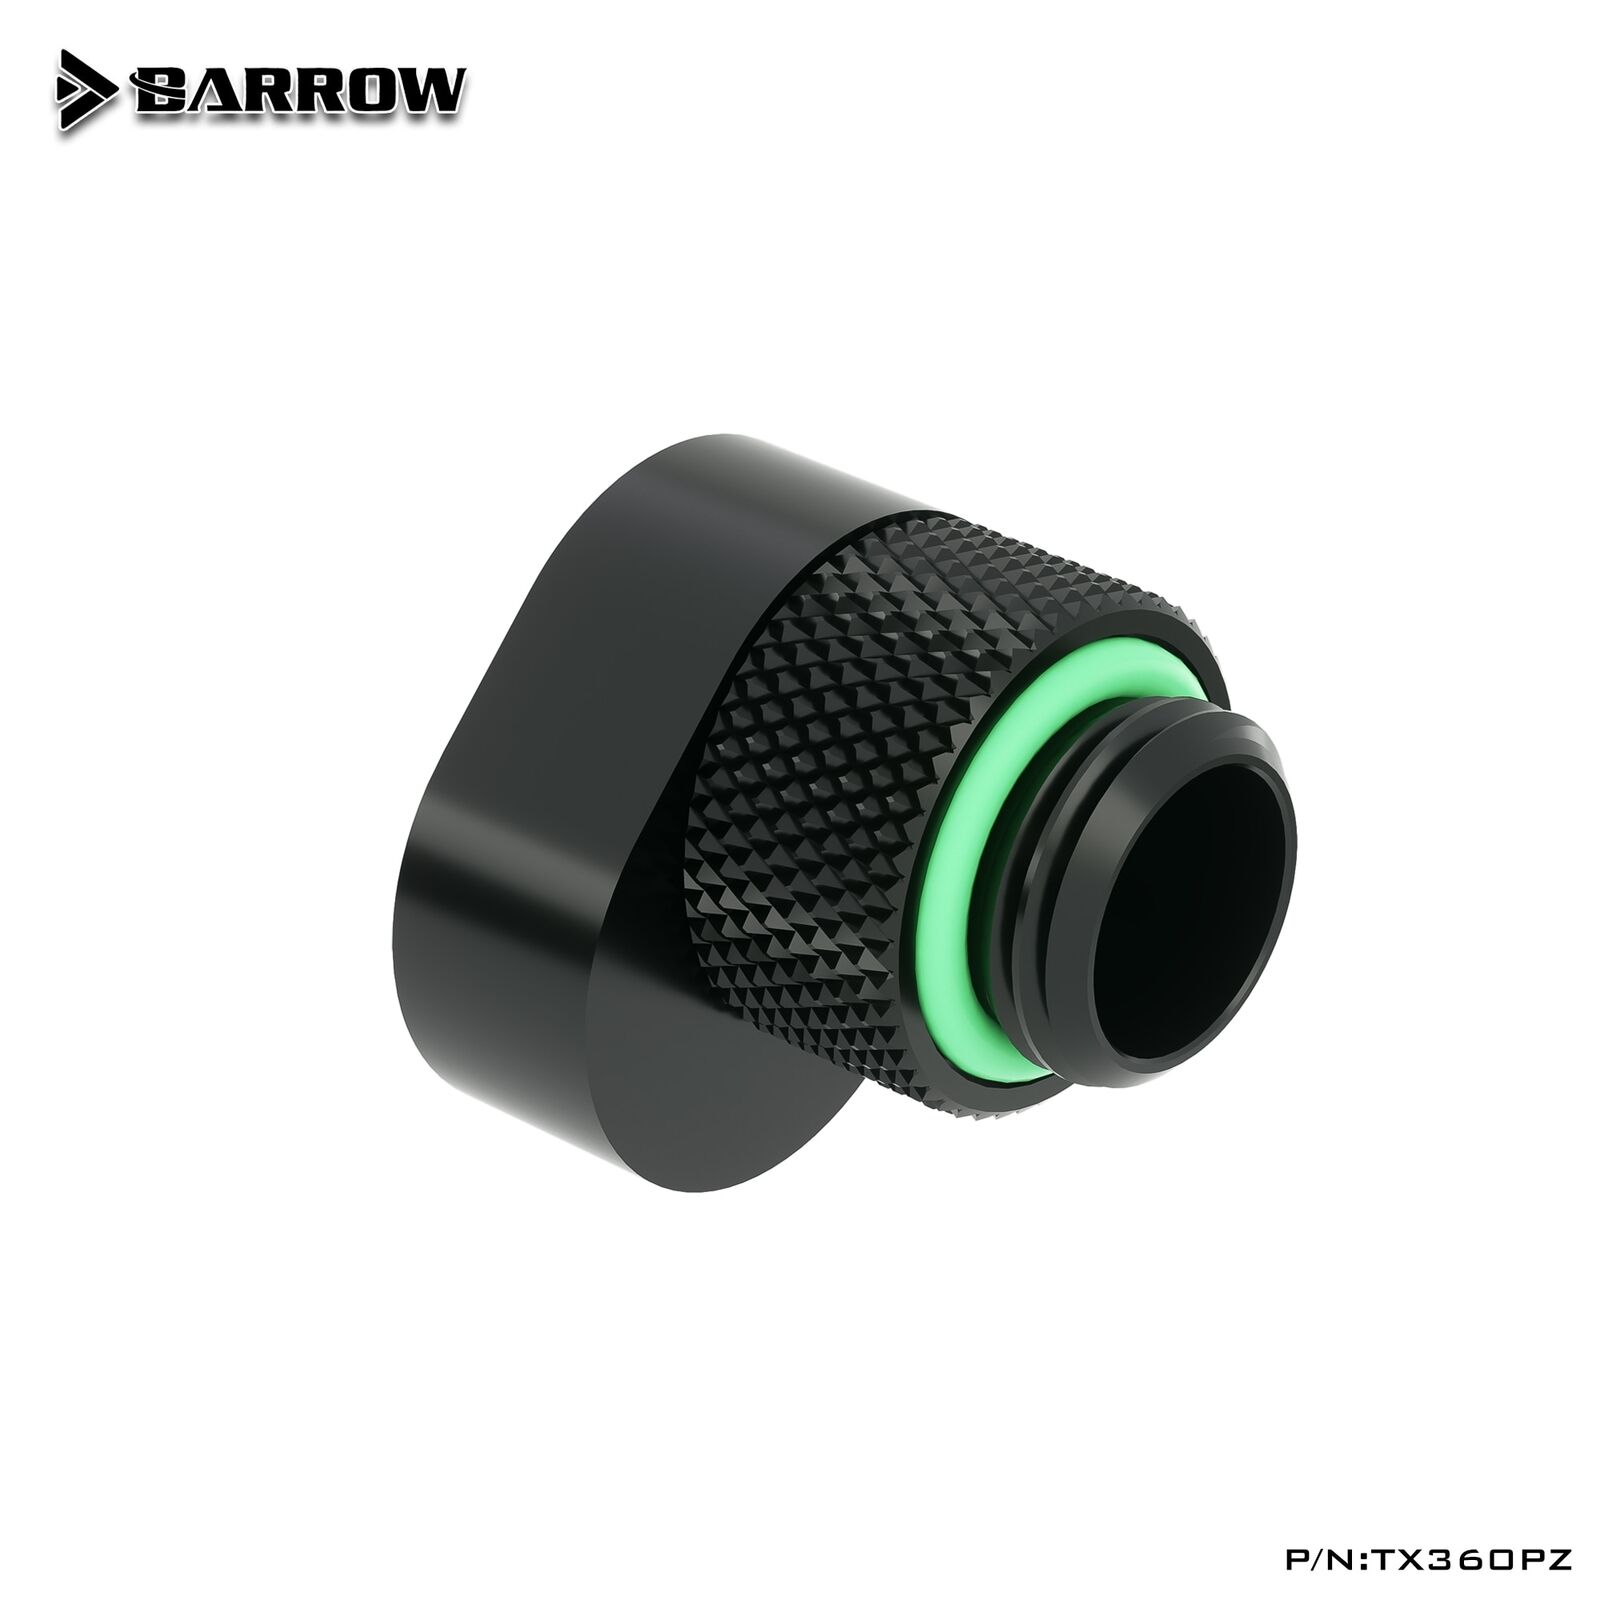 Barrow TX360PZ G1/4 Thread 360 Degrees Male to Female Rotary Offset 6mm Fitting